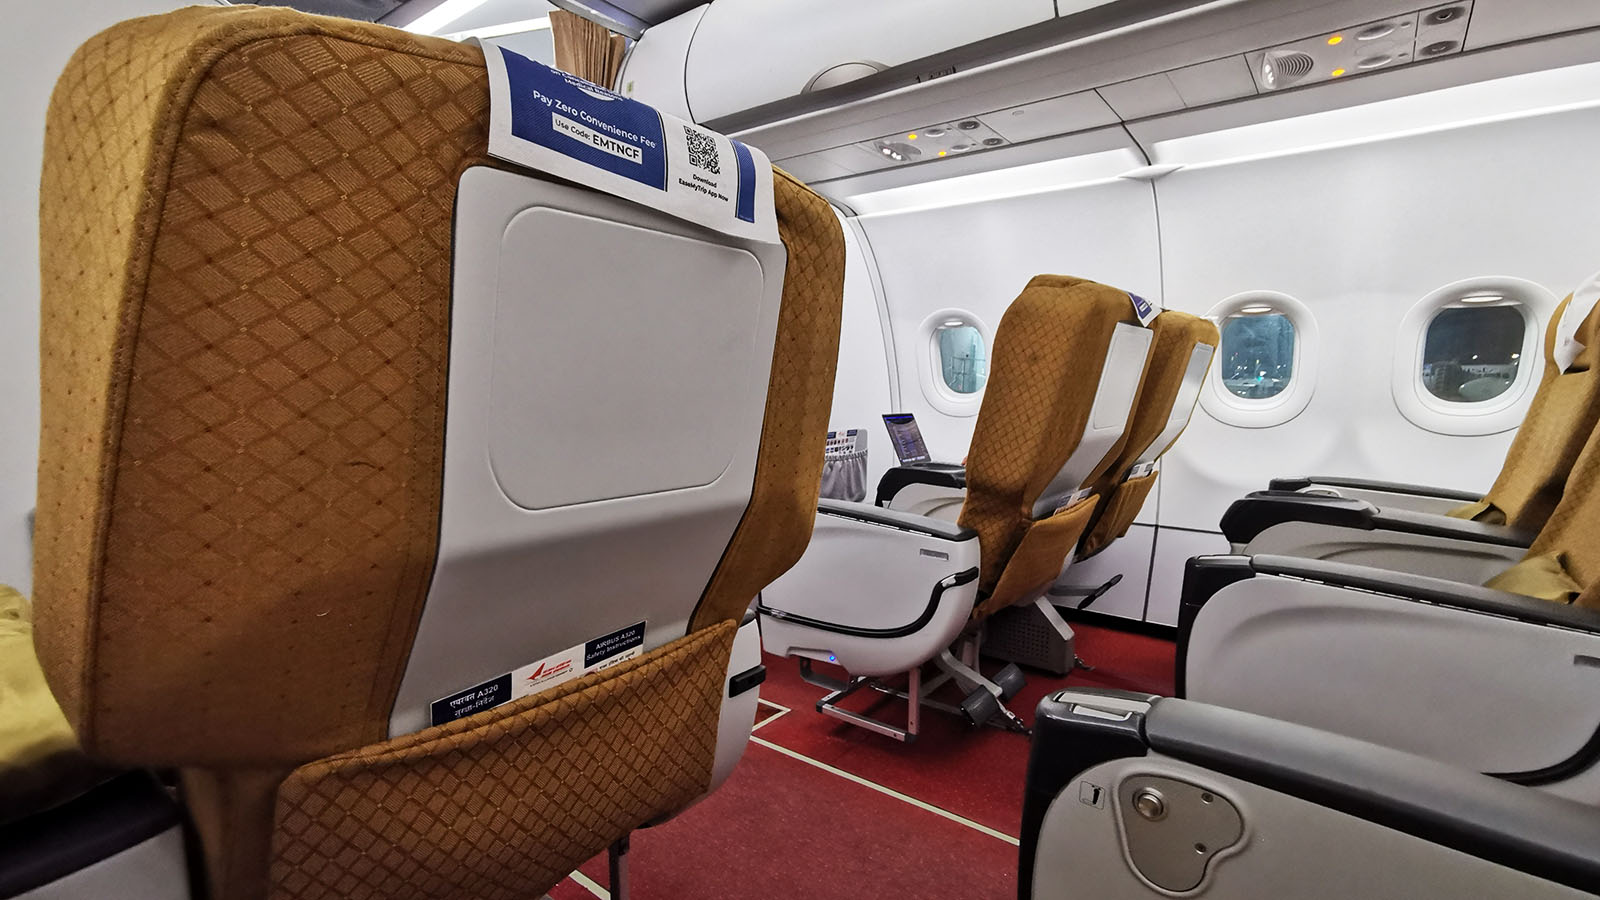 There's unfortunately no tablet holder in Air India A320neo Business Class